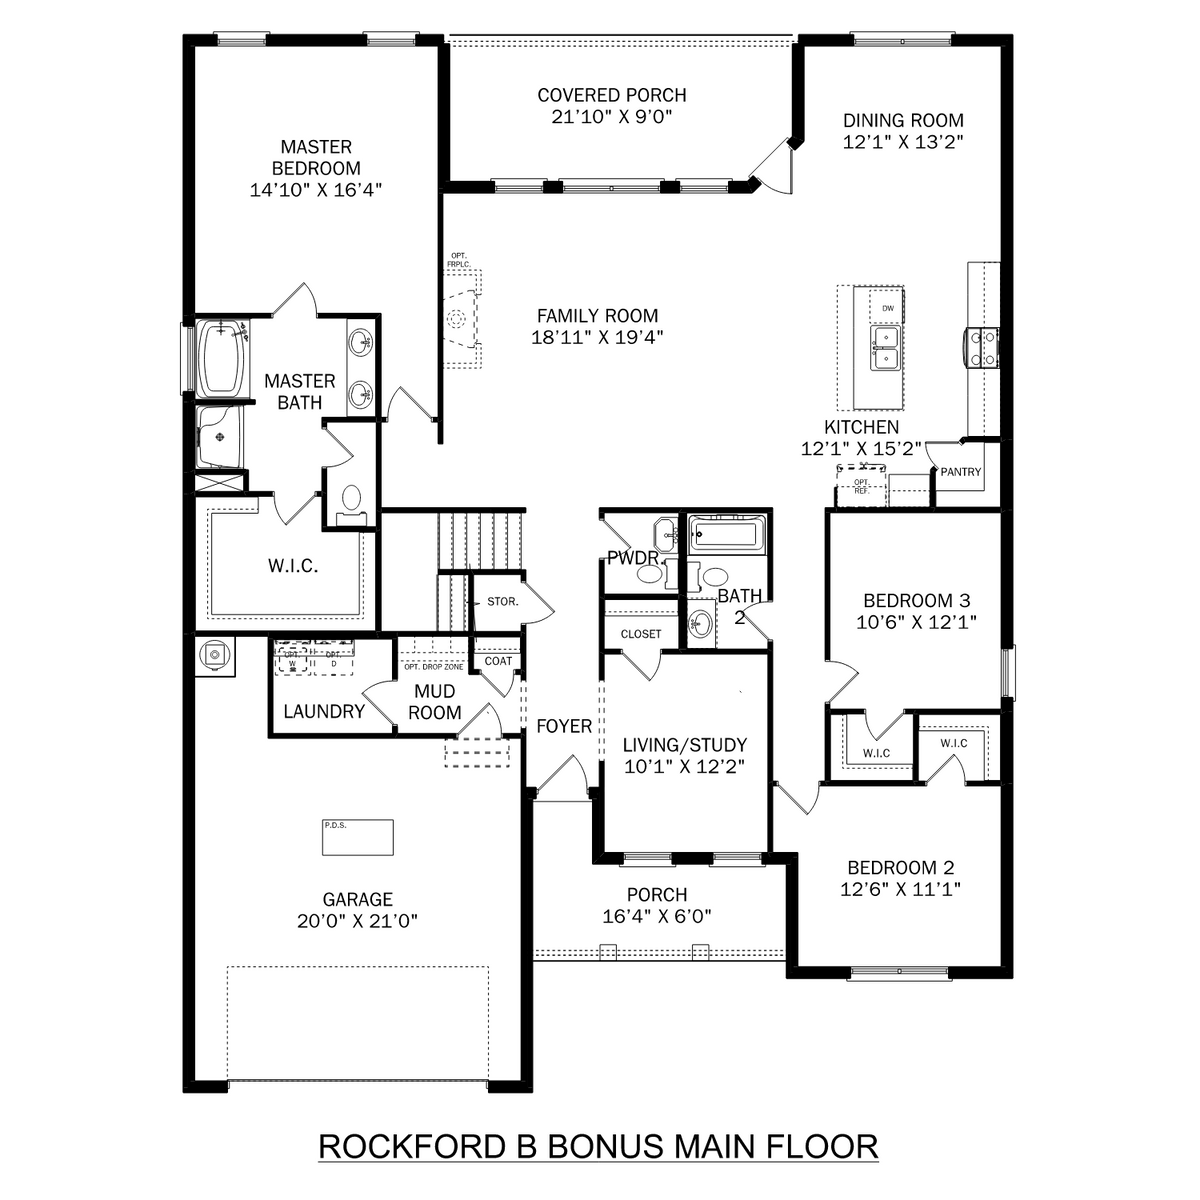 1 - The Rockford B with Bonus floor plan layout for 603 Ronnie Drive SE in Davidson Homes' Cain Park community.